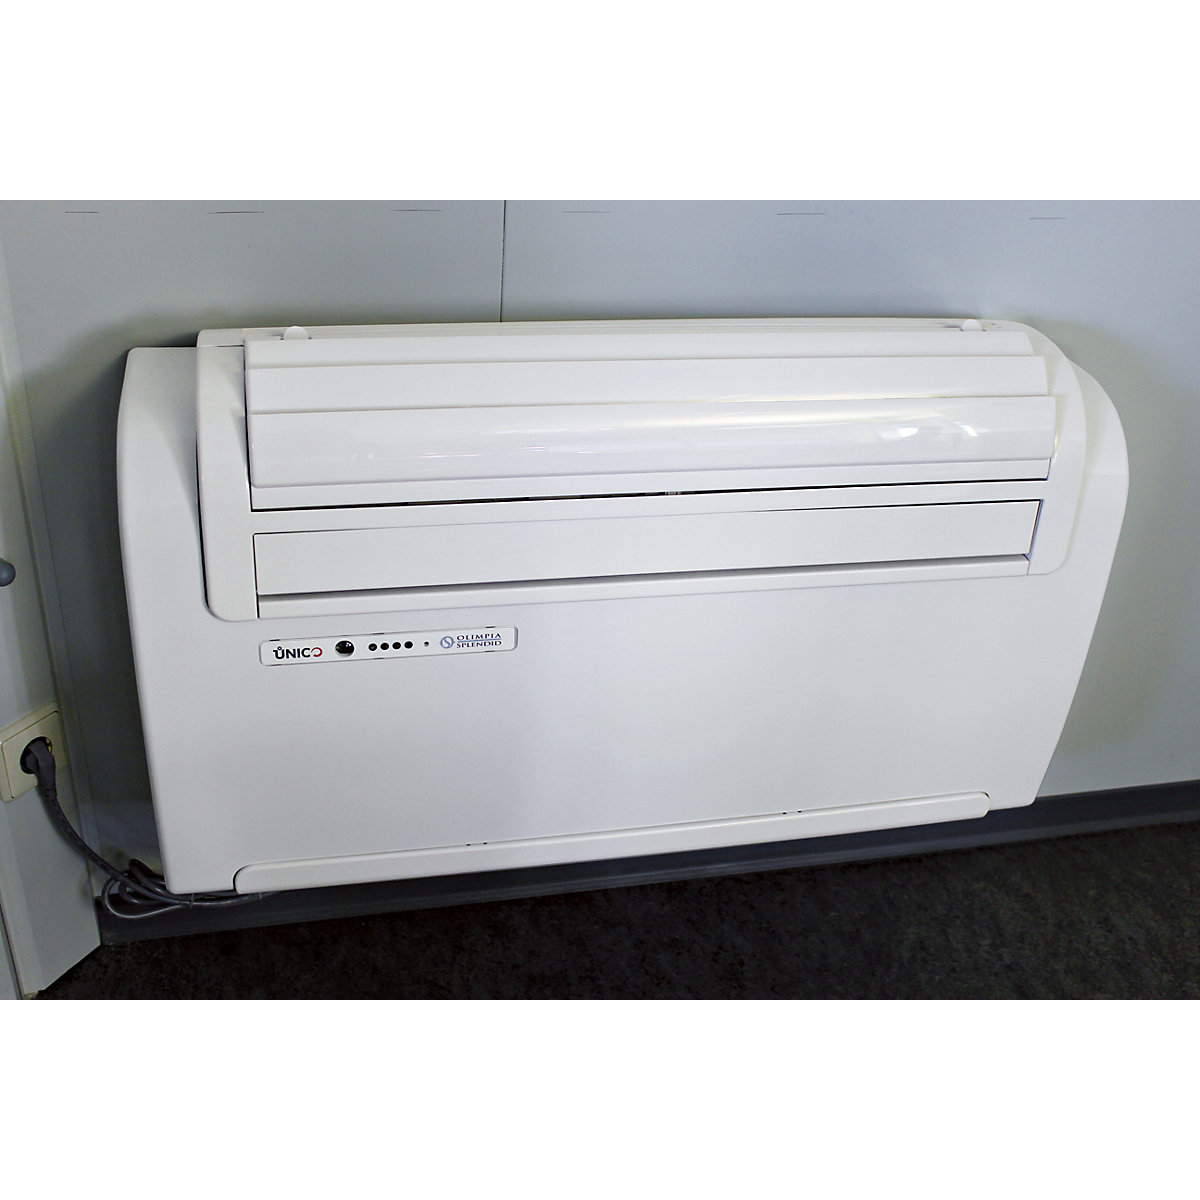 Wall-mounted air conditioner, power 2500 W, extra cost